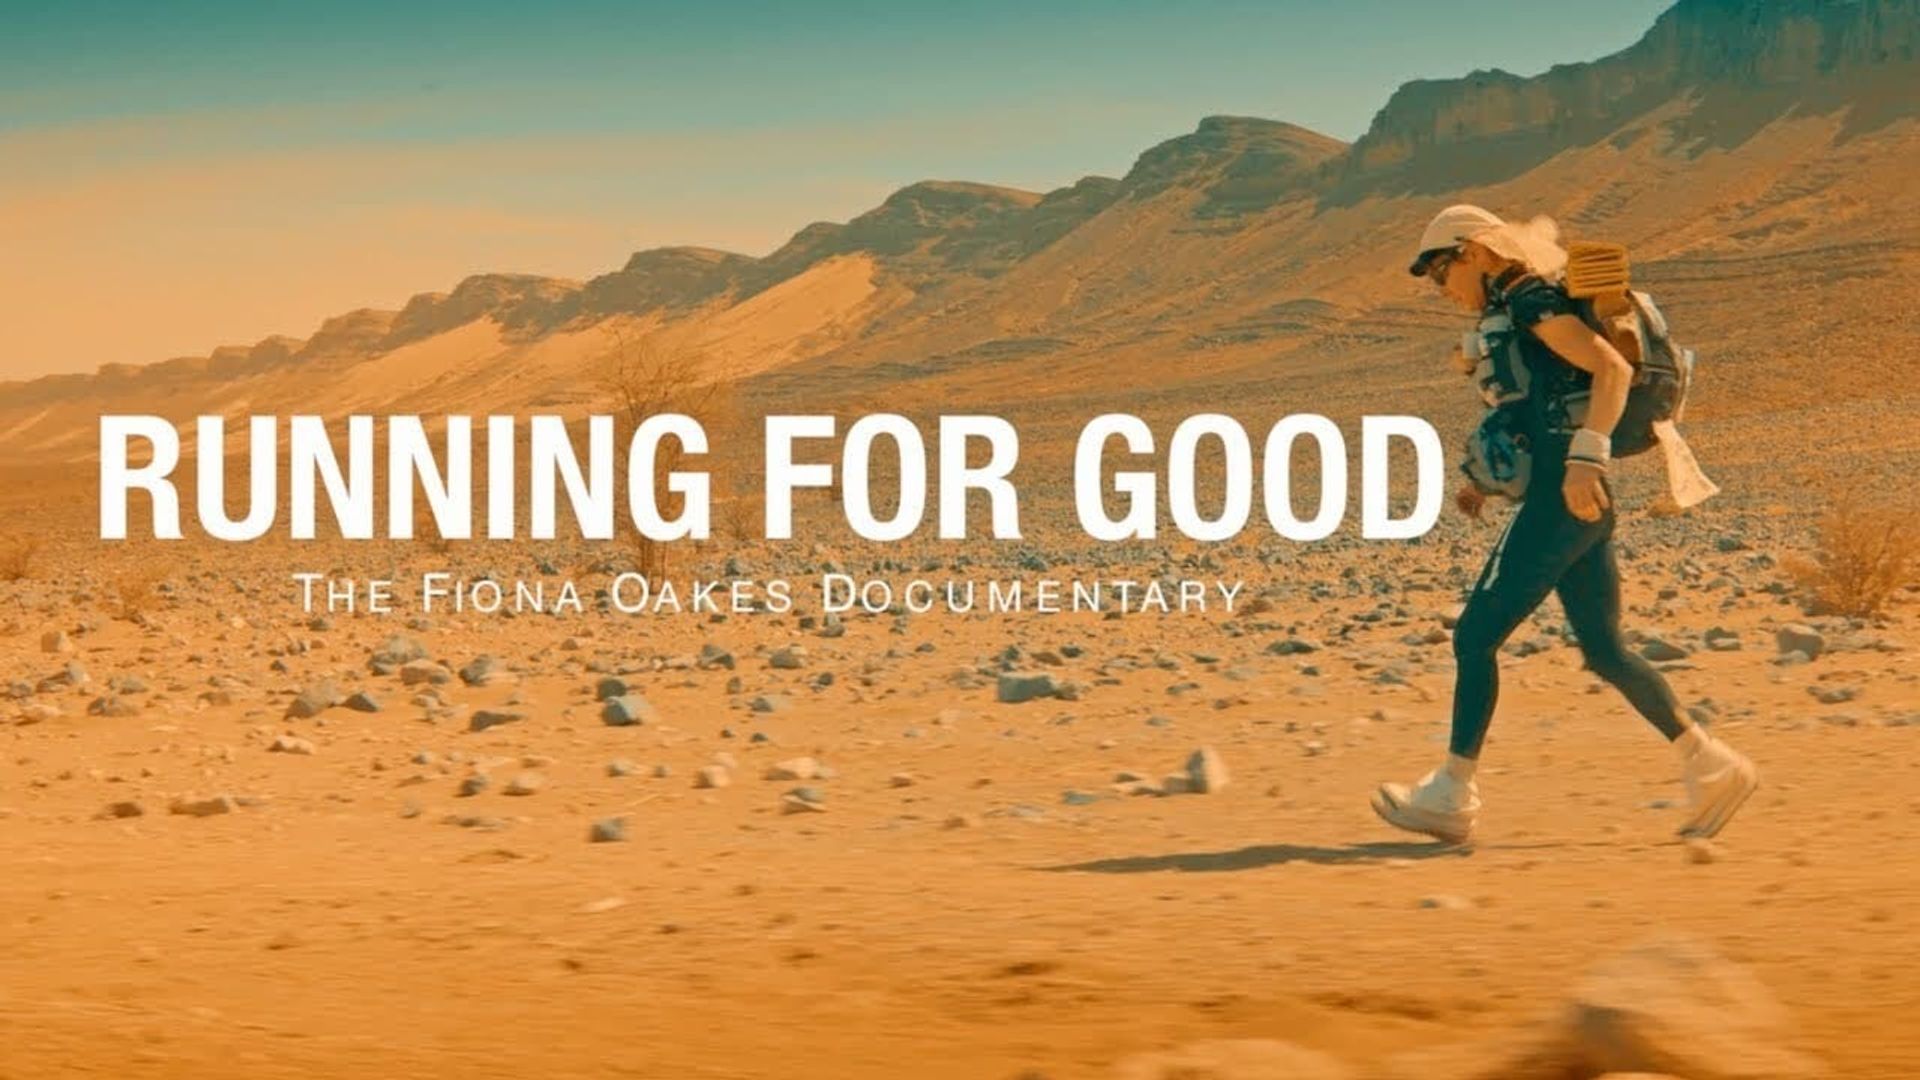 Running for Good: The Fiona Oakes Documentary background